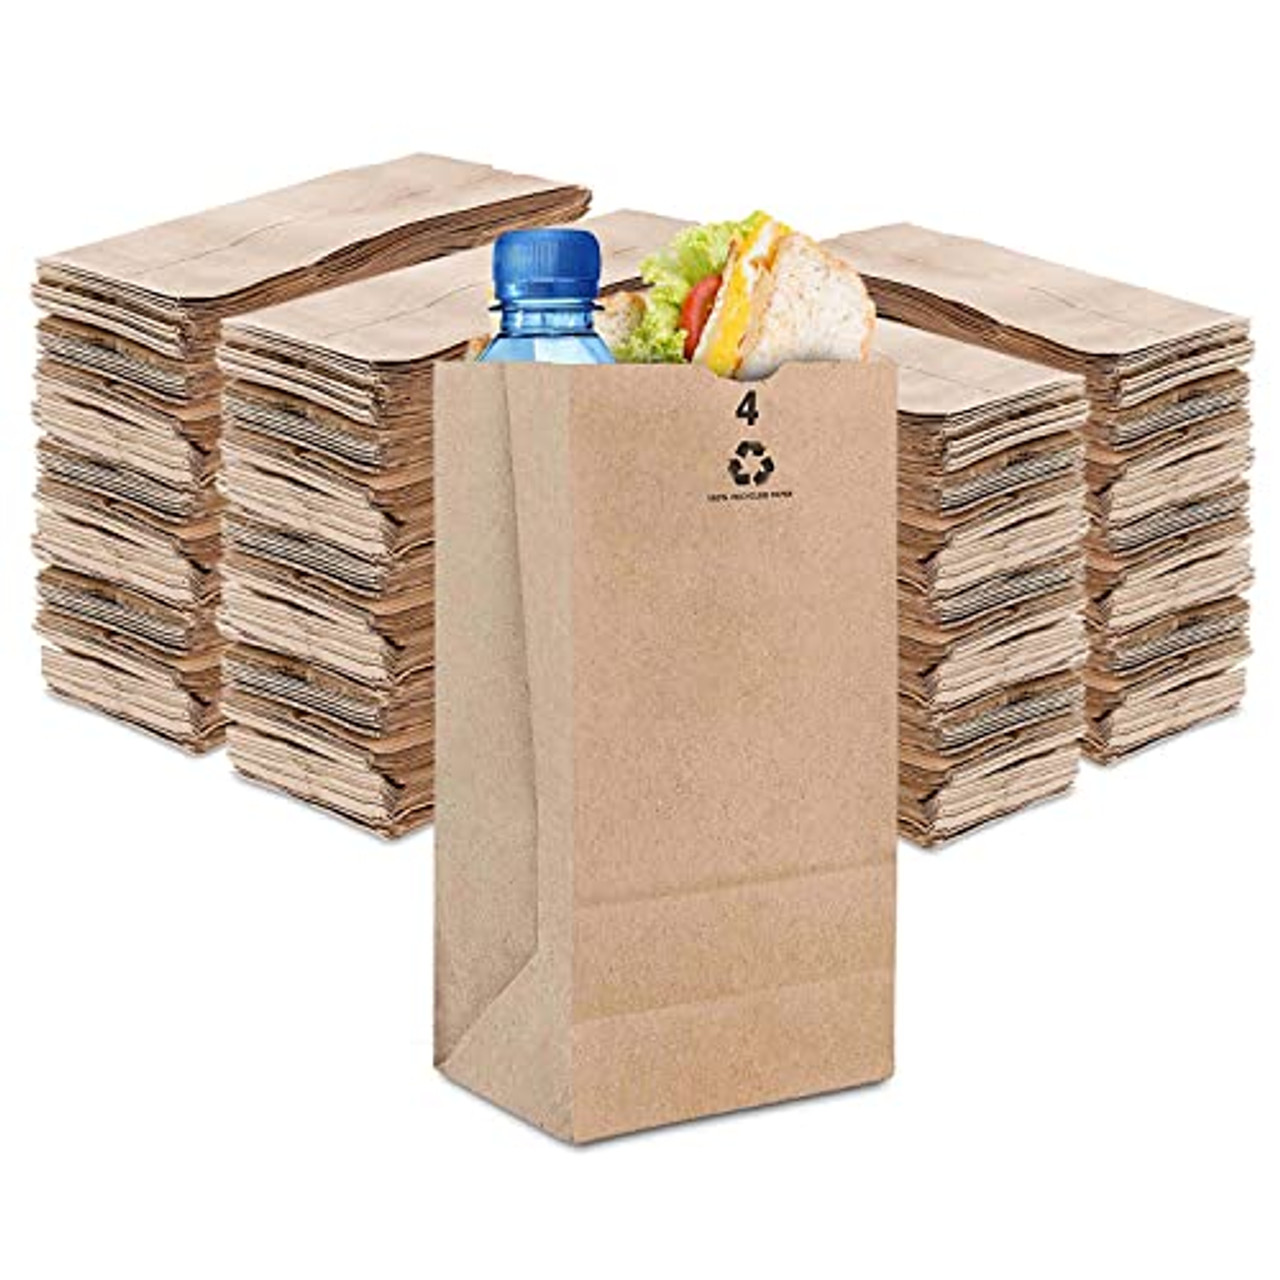 4-Lb Kraft Paper Bags (500 Pack) - Small Brown Paper Bags for Lunch -  Grocery Deli Paper Bags - Paper Sandwich Bags - Small Kraft Bakery Bags -  Paper Candy Bags - Brown Treat Bags - Stock Your Home